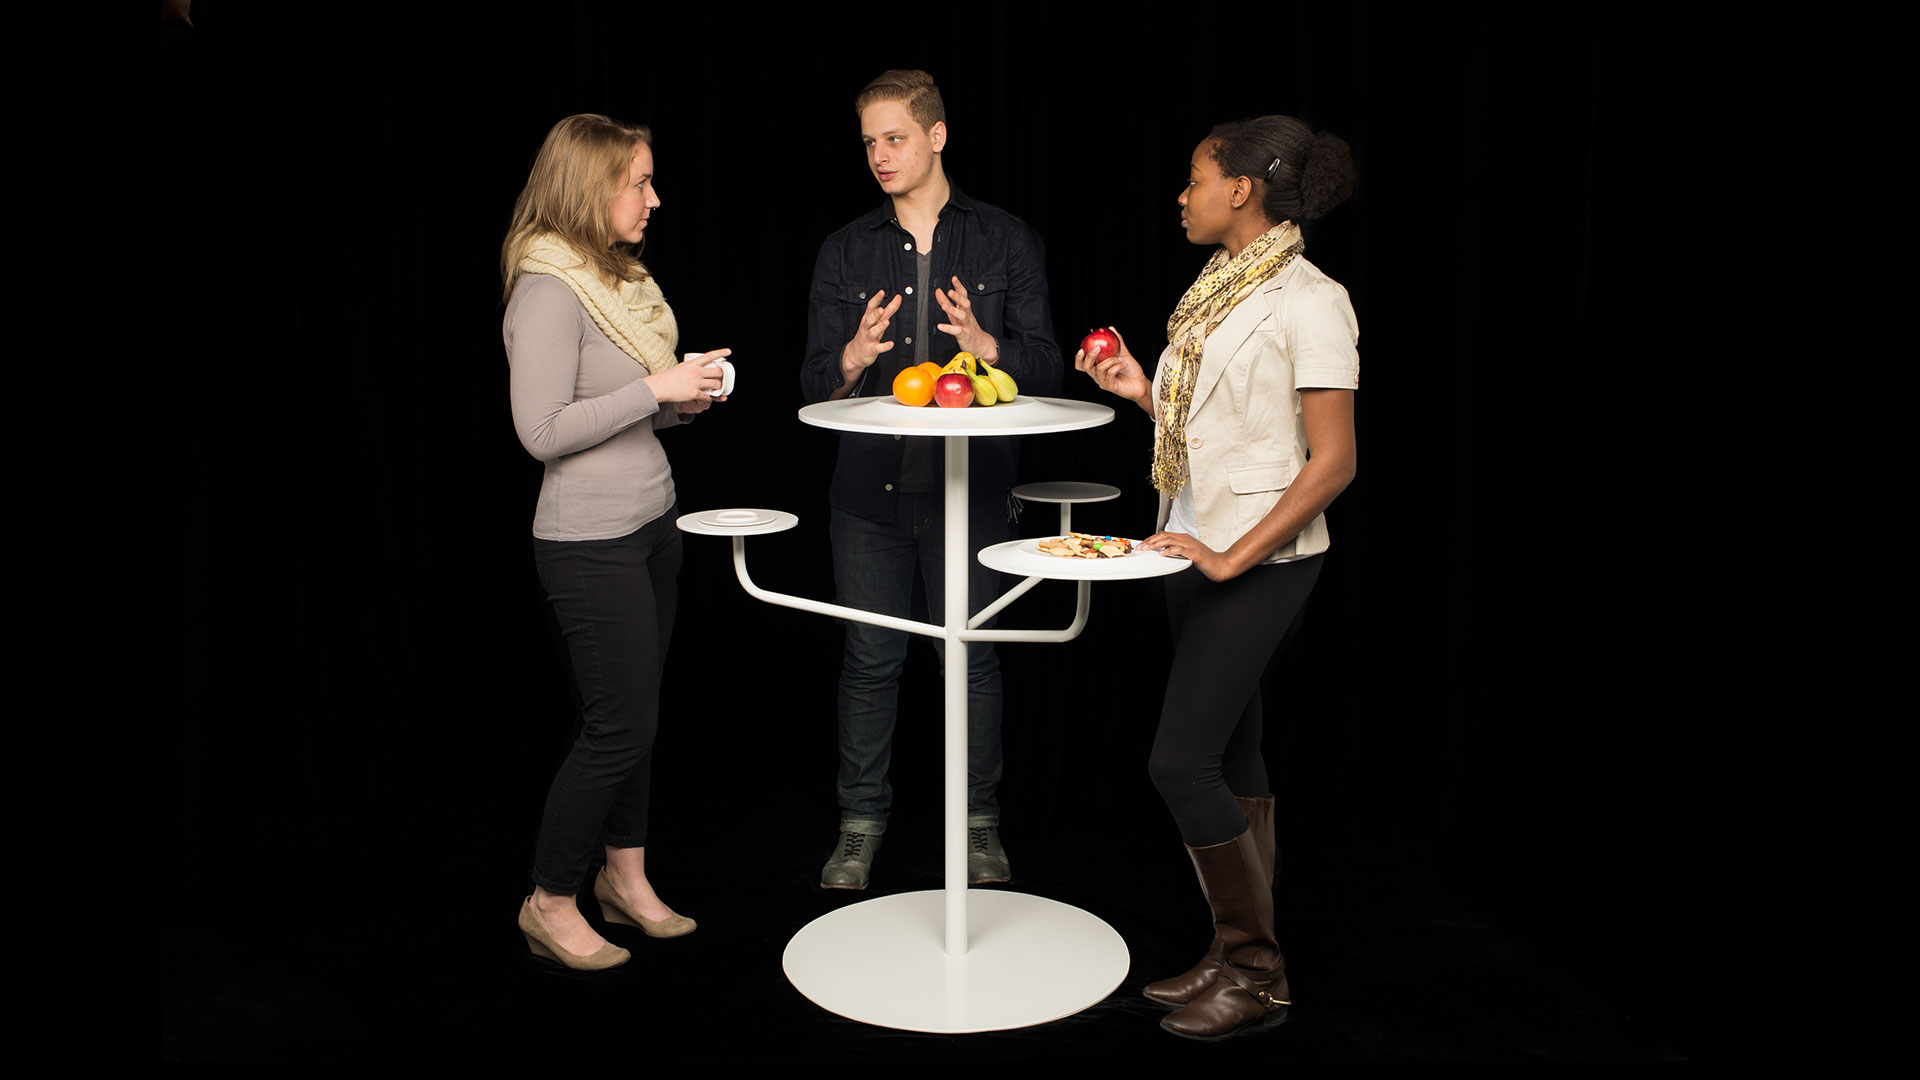 Three students gathered around a tall bar height circular white table with three smaller circular platforms coming out from central post below for additional surface area, assorted food items on table top